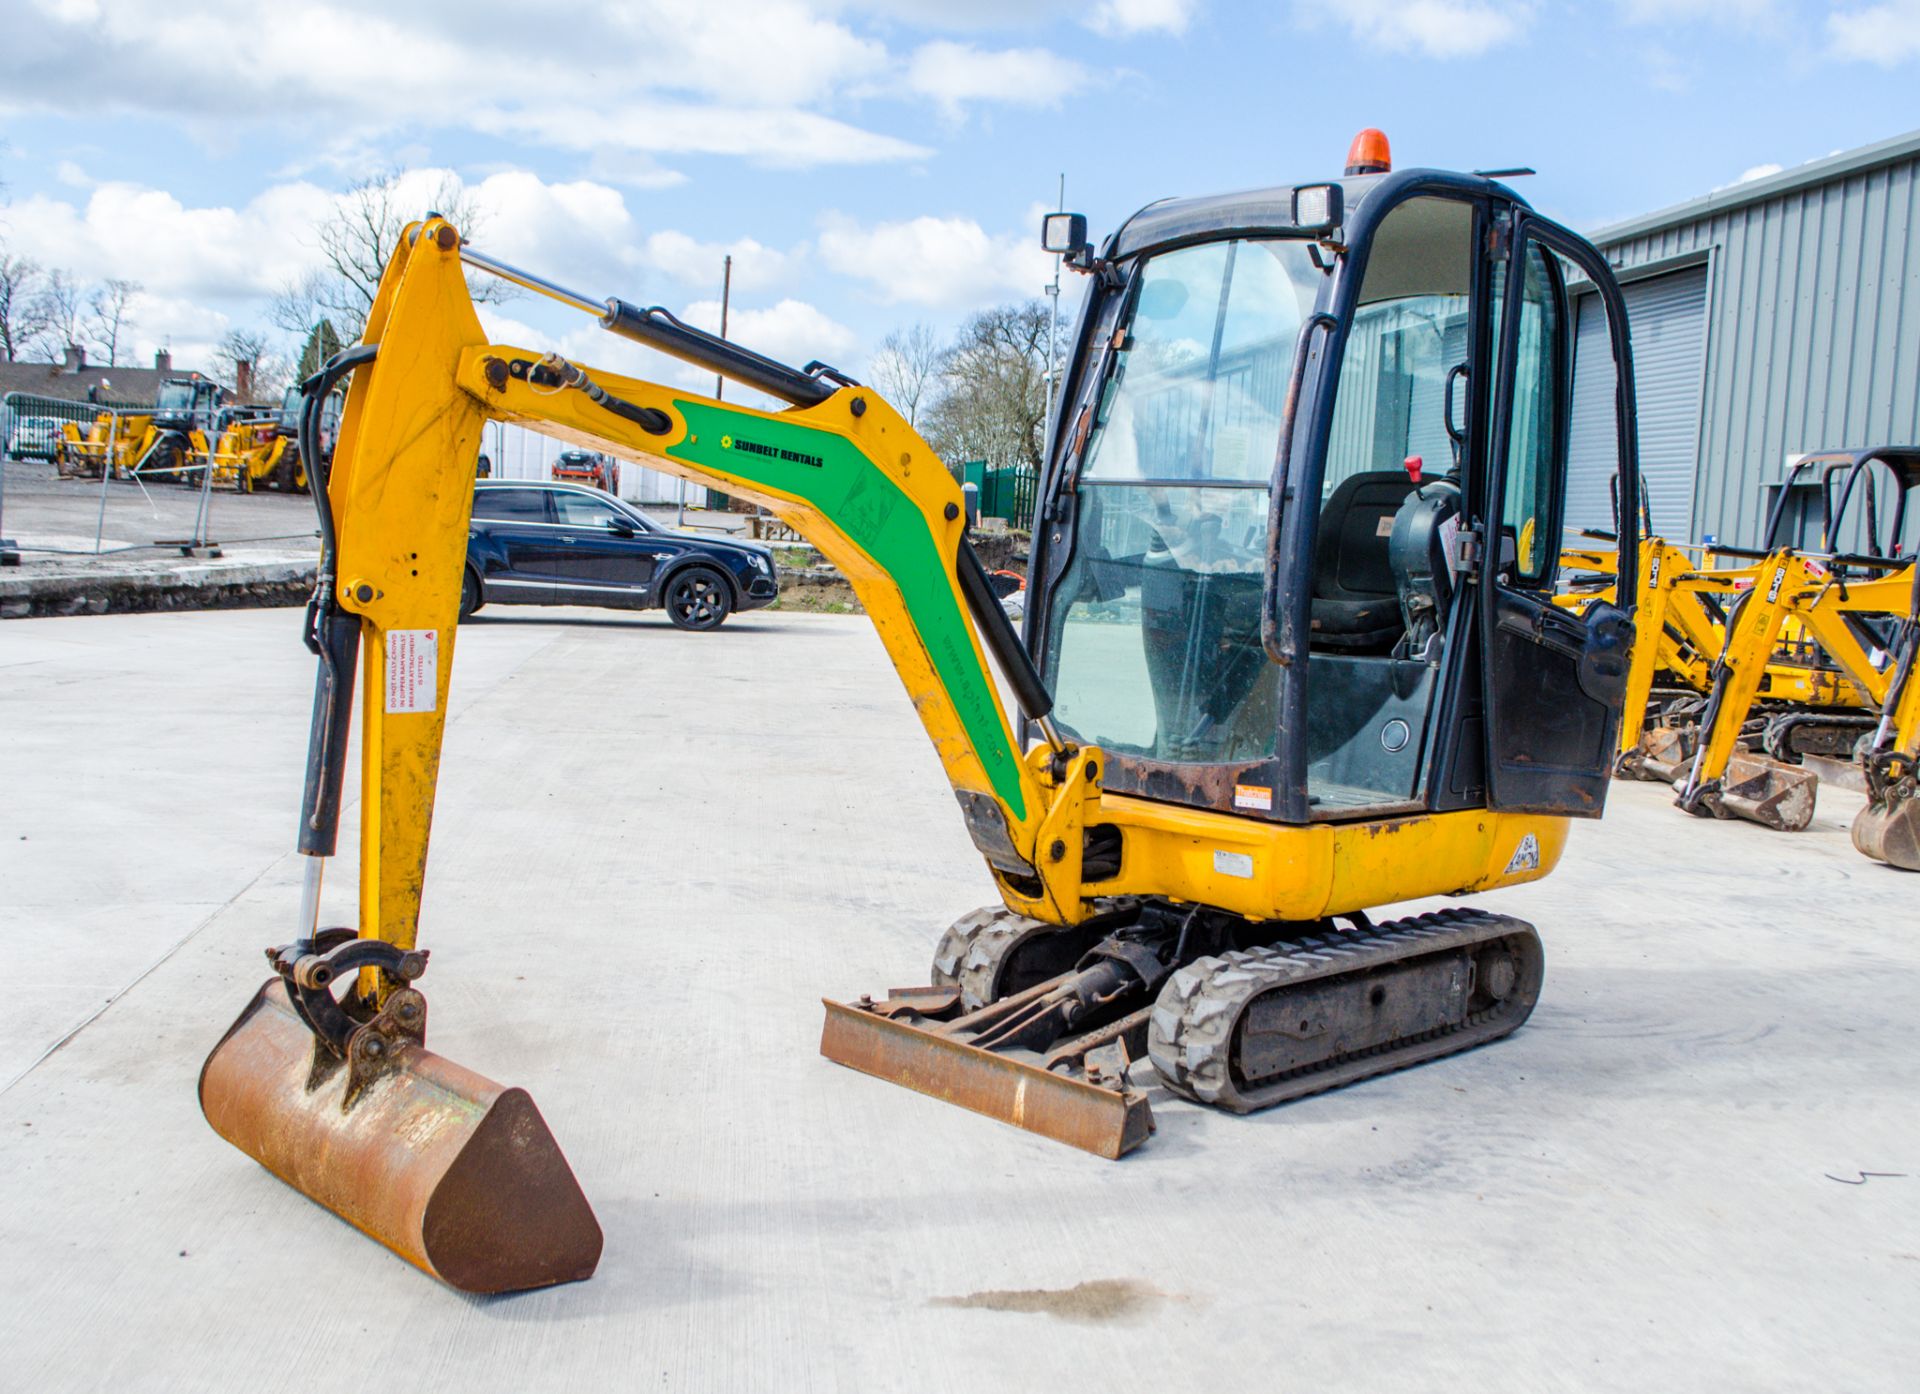 JCB 8018 1.8 tonne rubber tracked mini excavator Year: 2015 S/N: 233560 Recorded Hours: 2597